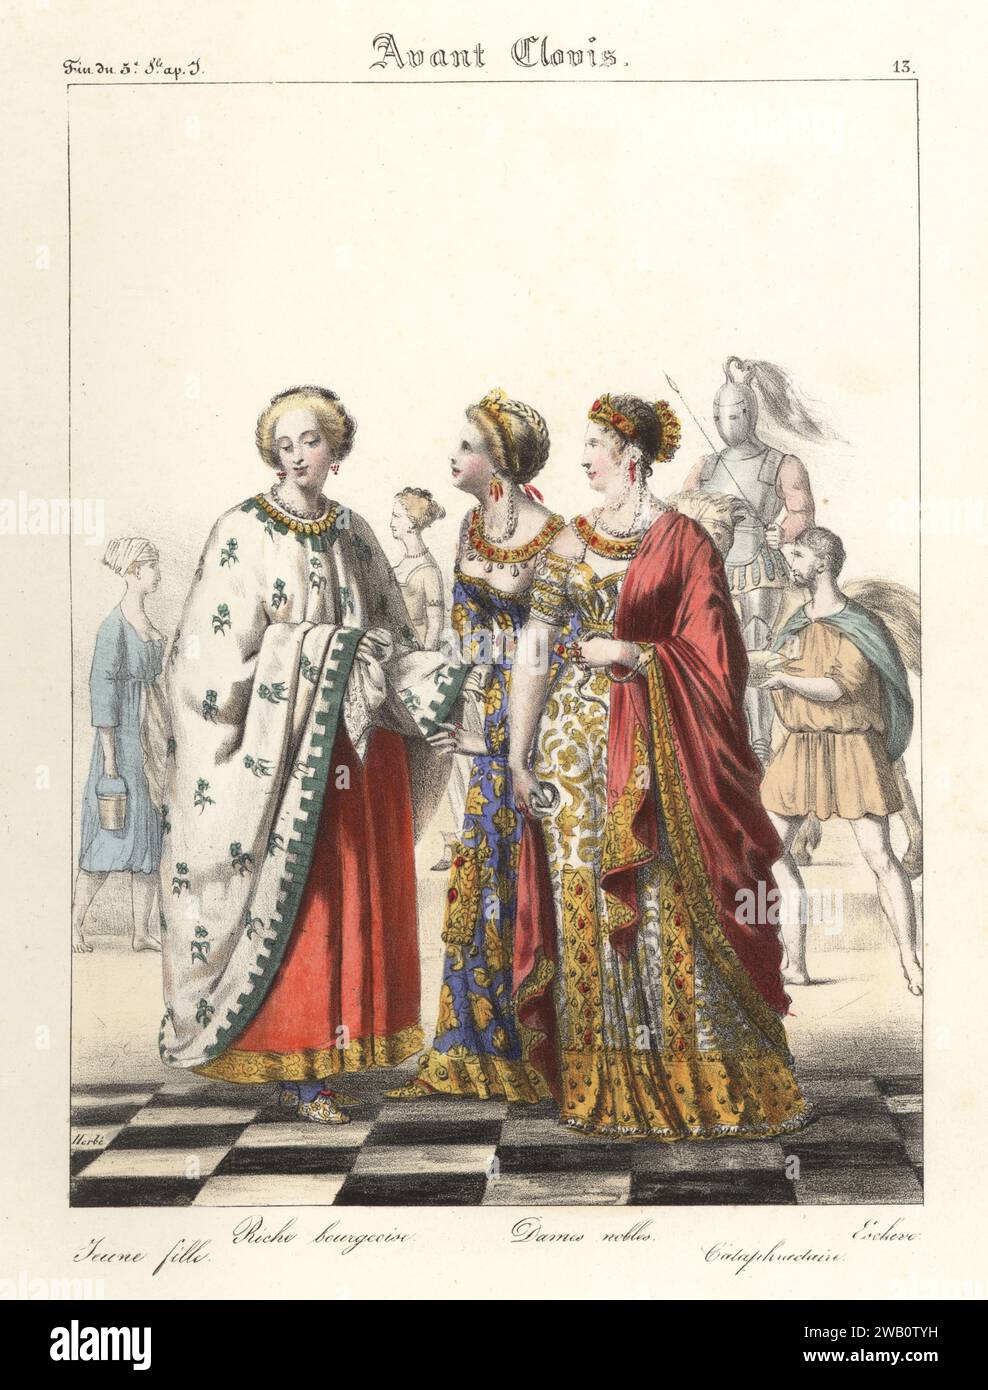 Costumes of rich and noble Gauls, end of the 5th century. Rich bourgeois and noblewomen in bejeweled headdresses, embroidered mantles and robes, one holding a snake. In the background, a mounted cataphract in full armour and an enslaved man. Jeune fille, Riche bourgeoise, Dames nobles, Cataphractaire, Escleve. Avant Clovis. Handcoloured lithograph by Godard after an illustration by Charles Auguste Herbé from his own Costumes Francais, Civils, Militaires et Religieux, French Costumes, Civil, Military and Religious, Maison Martinet, Paris, 1837. Stock Photo